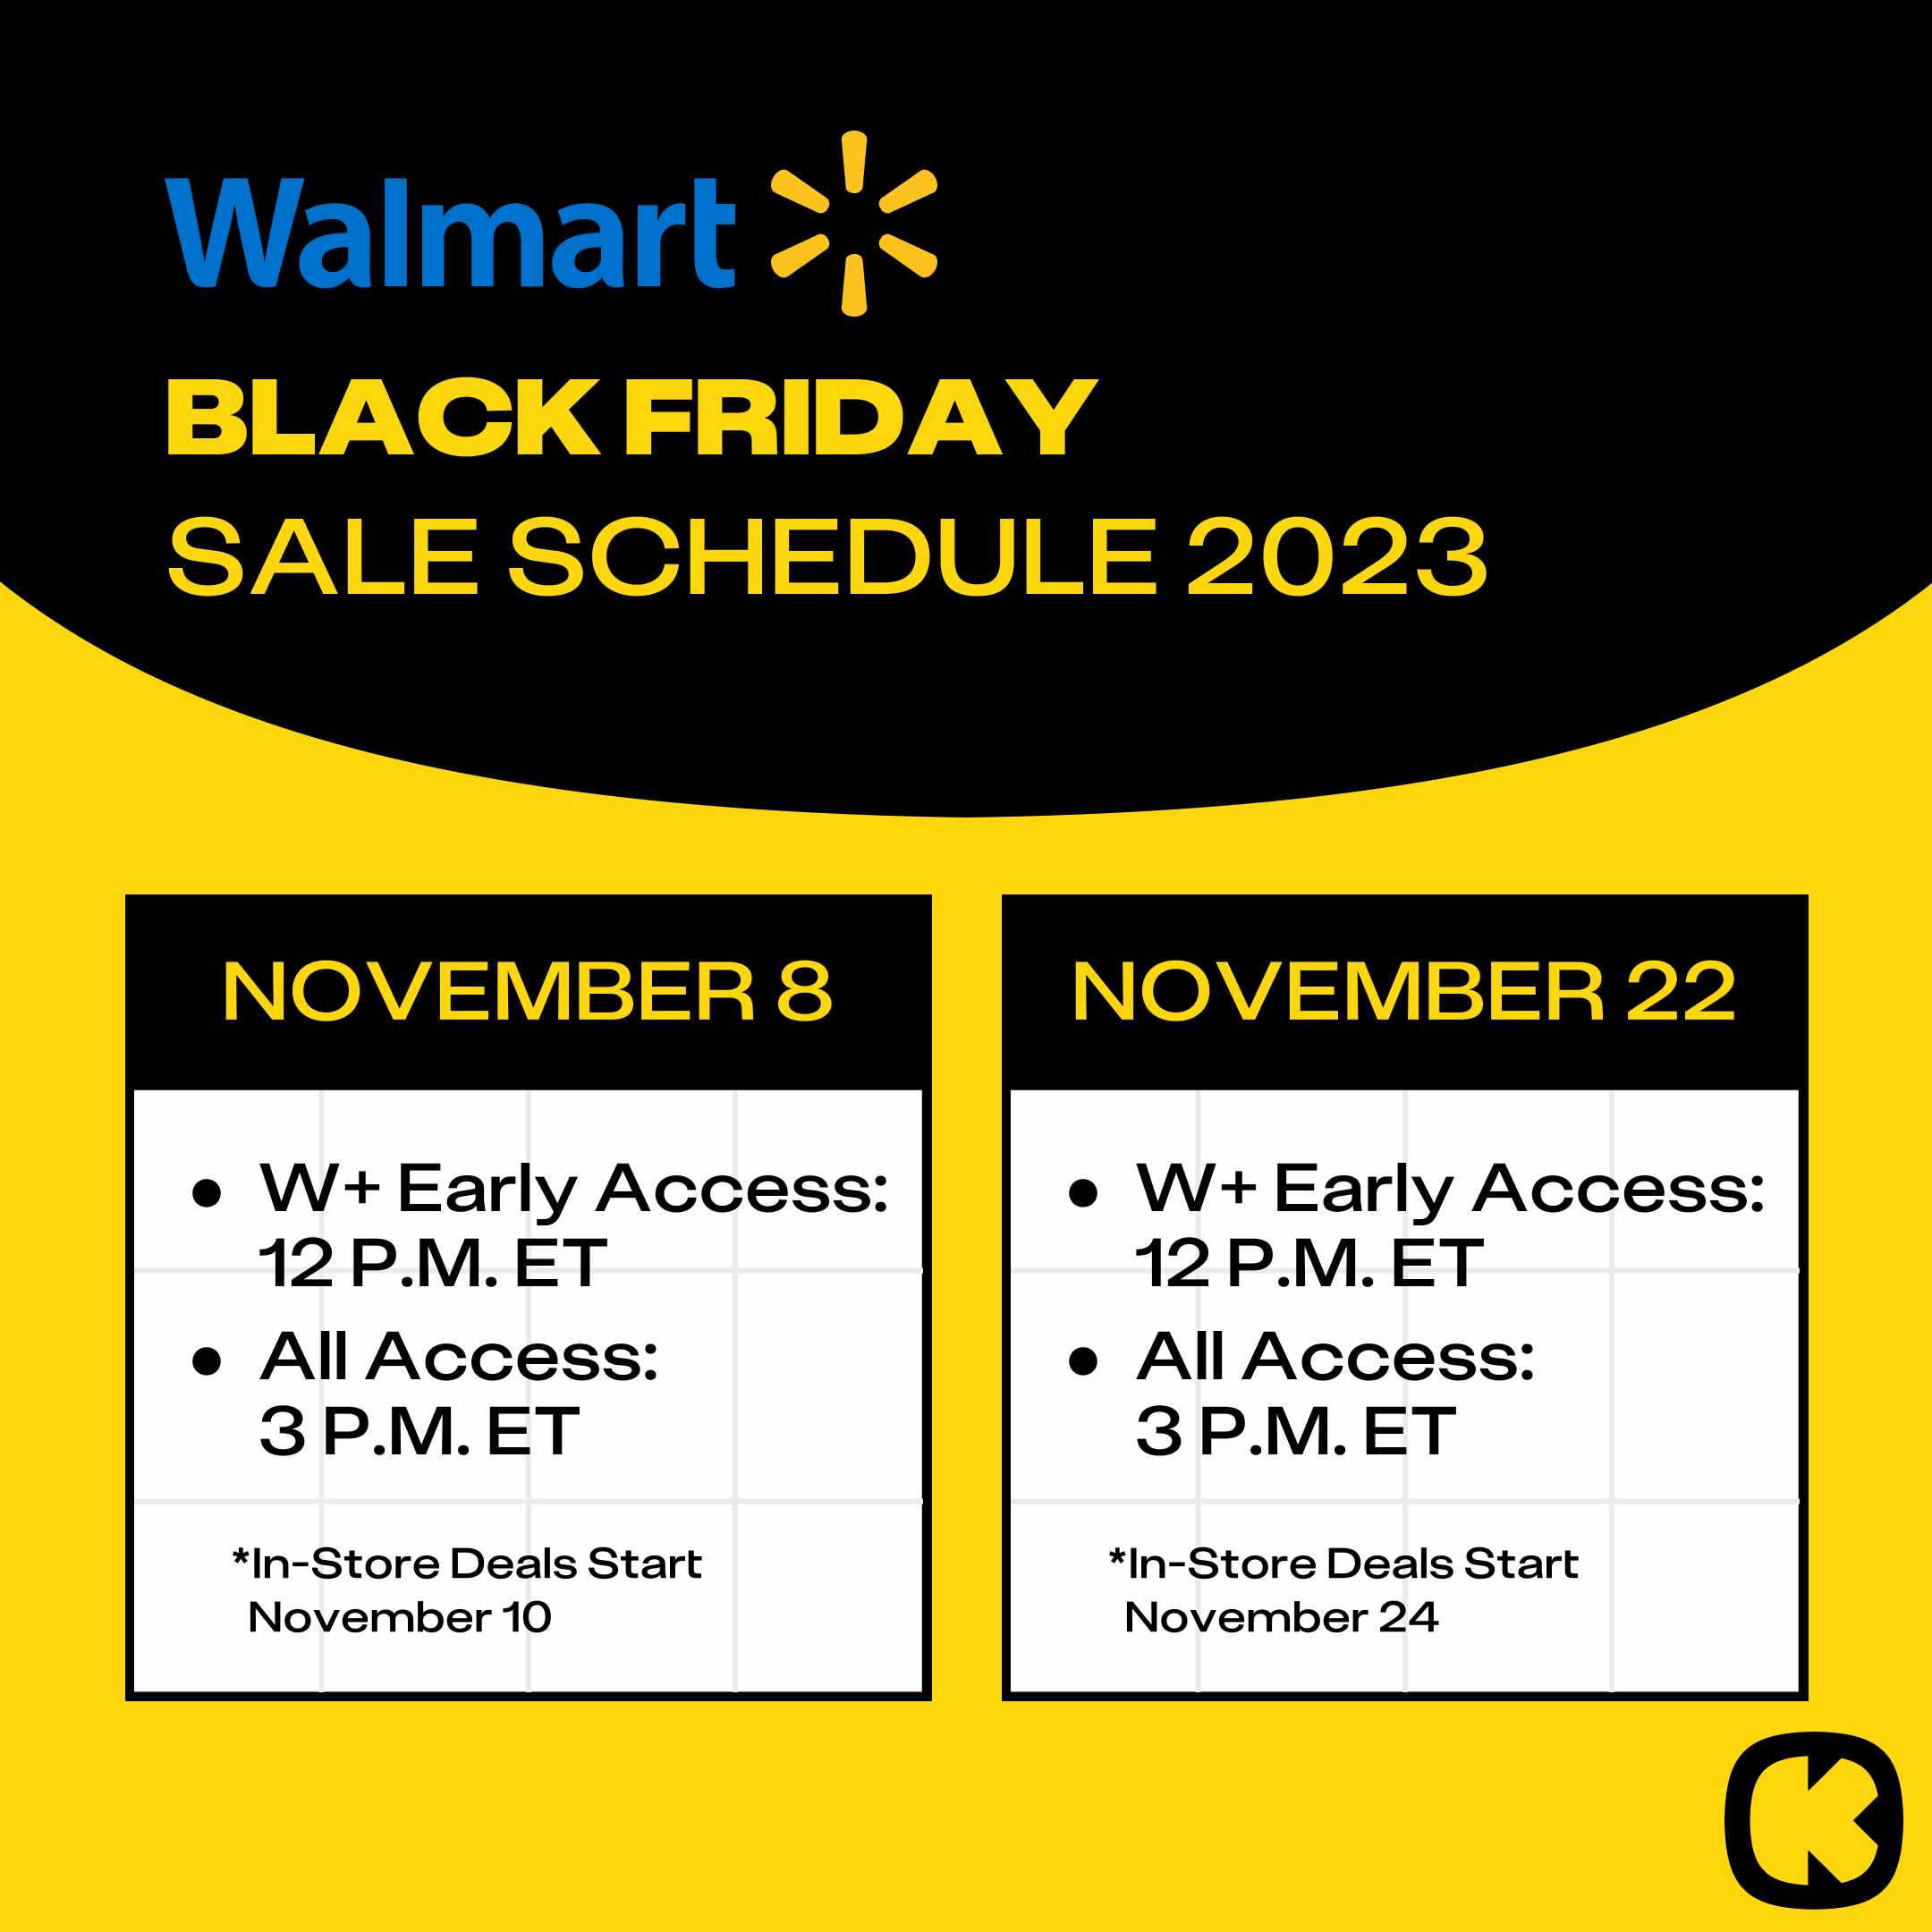 The Walmart Black Friday 2023 Sale Schedule - early deals start Nov. 8 at 12 pm and the main black friday sale starts Nov. 22 at 12 p.m.